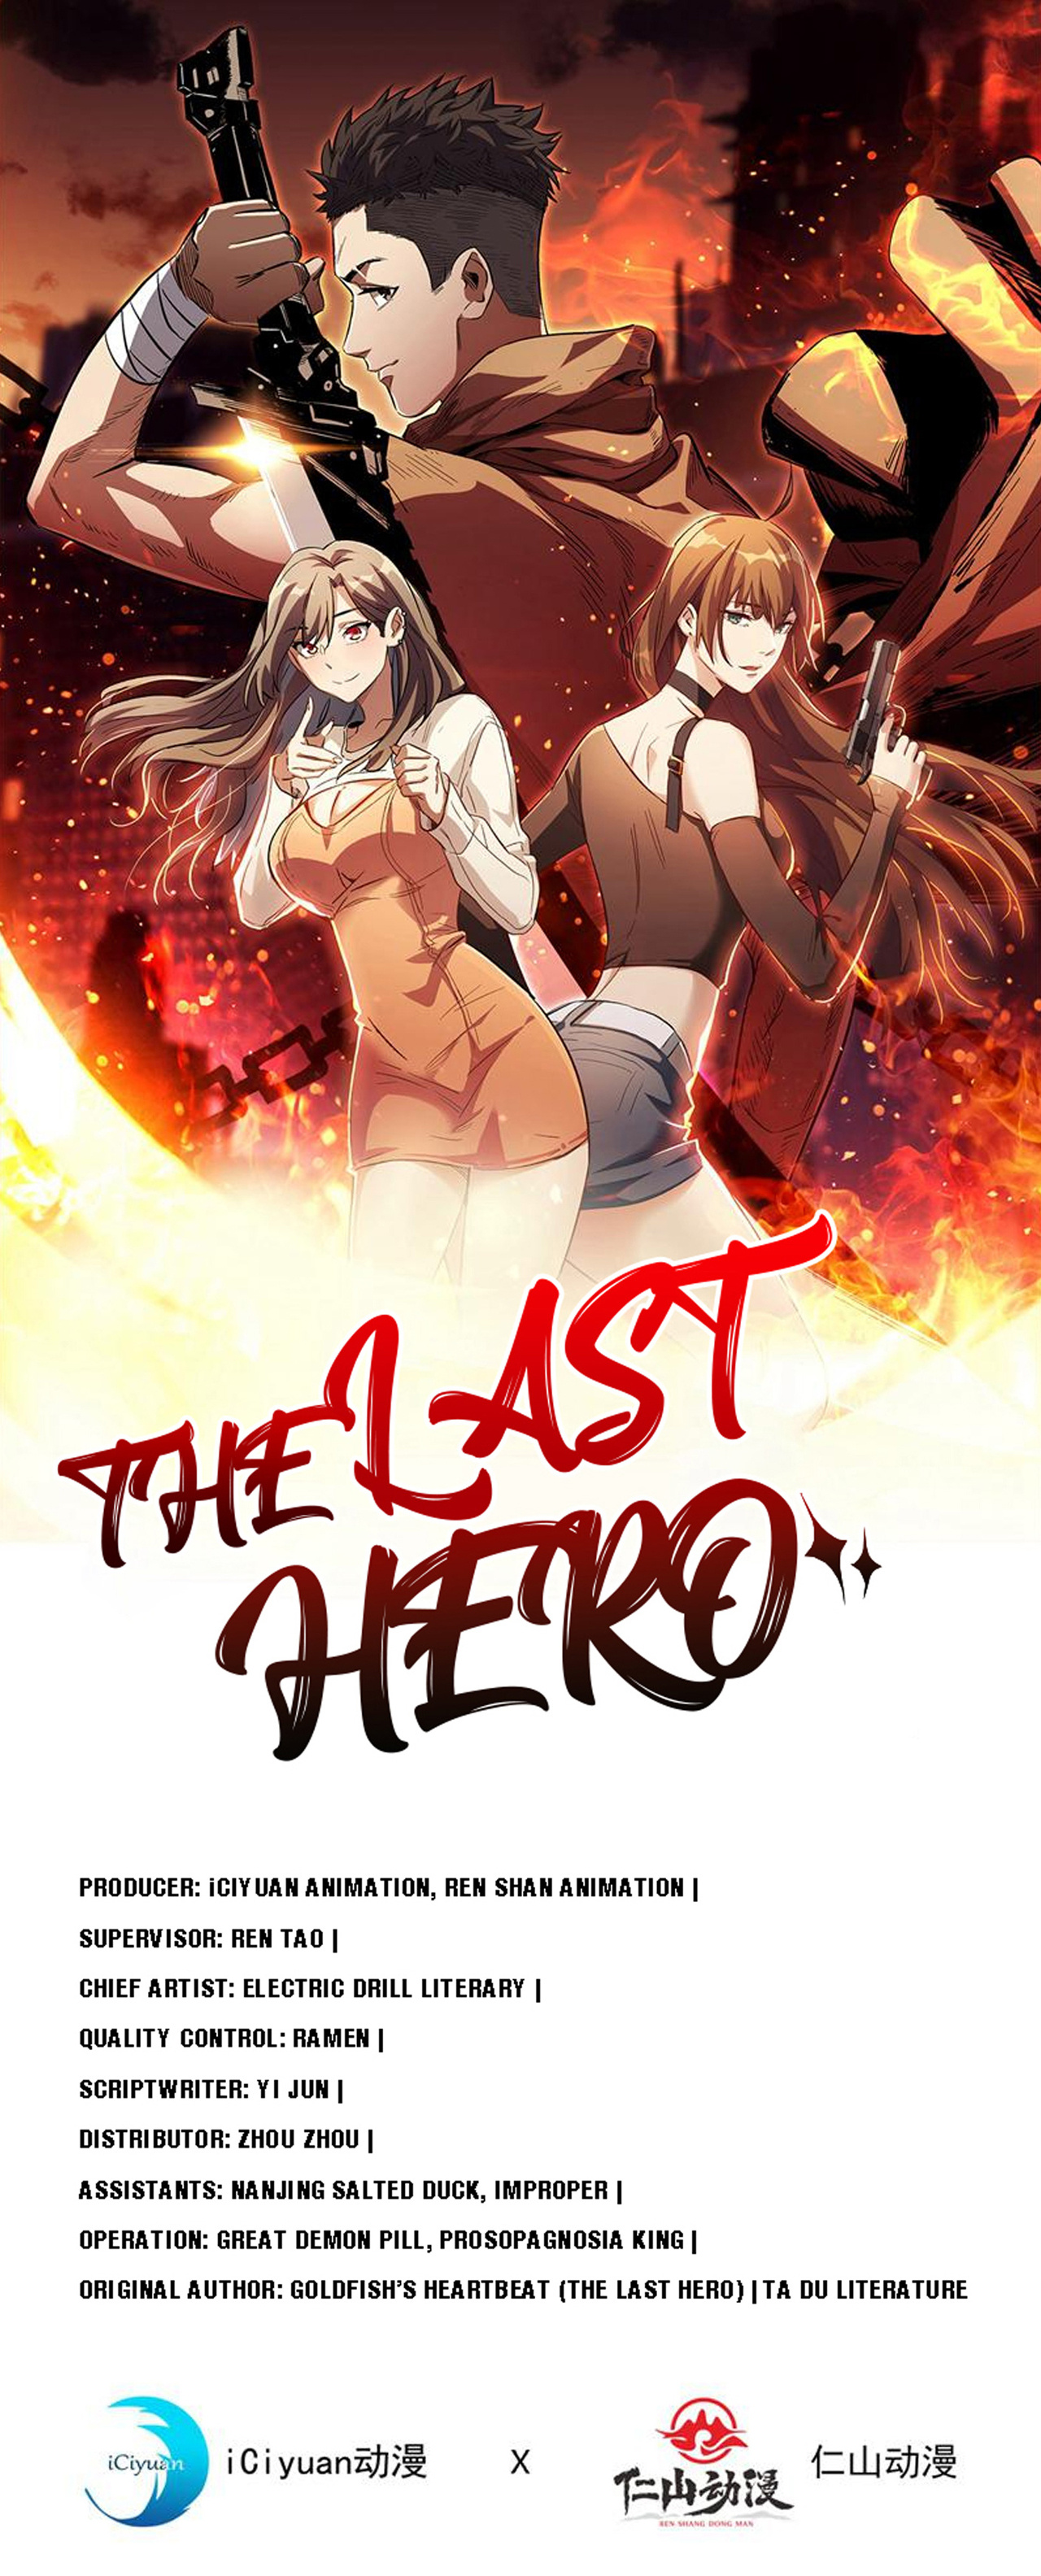 The Last Hero, I Am Picking up Attributes and Items in Last Days 131